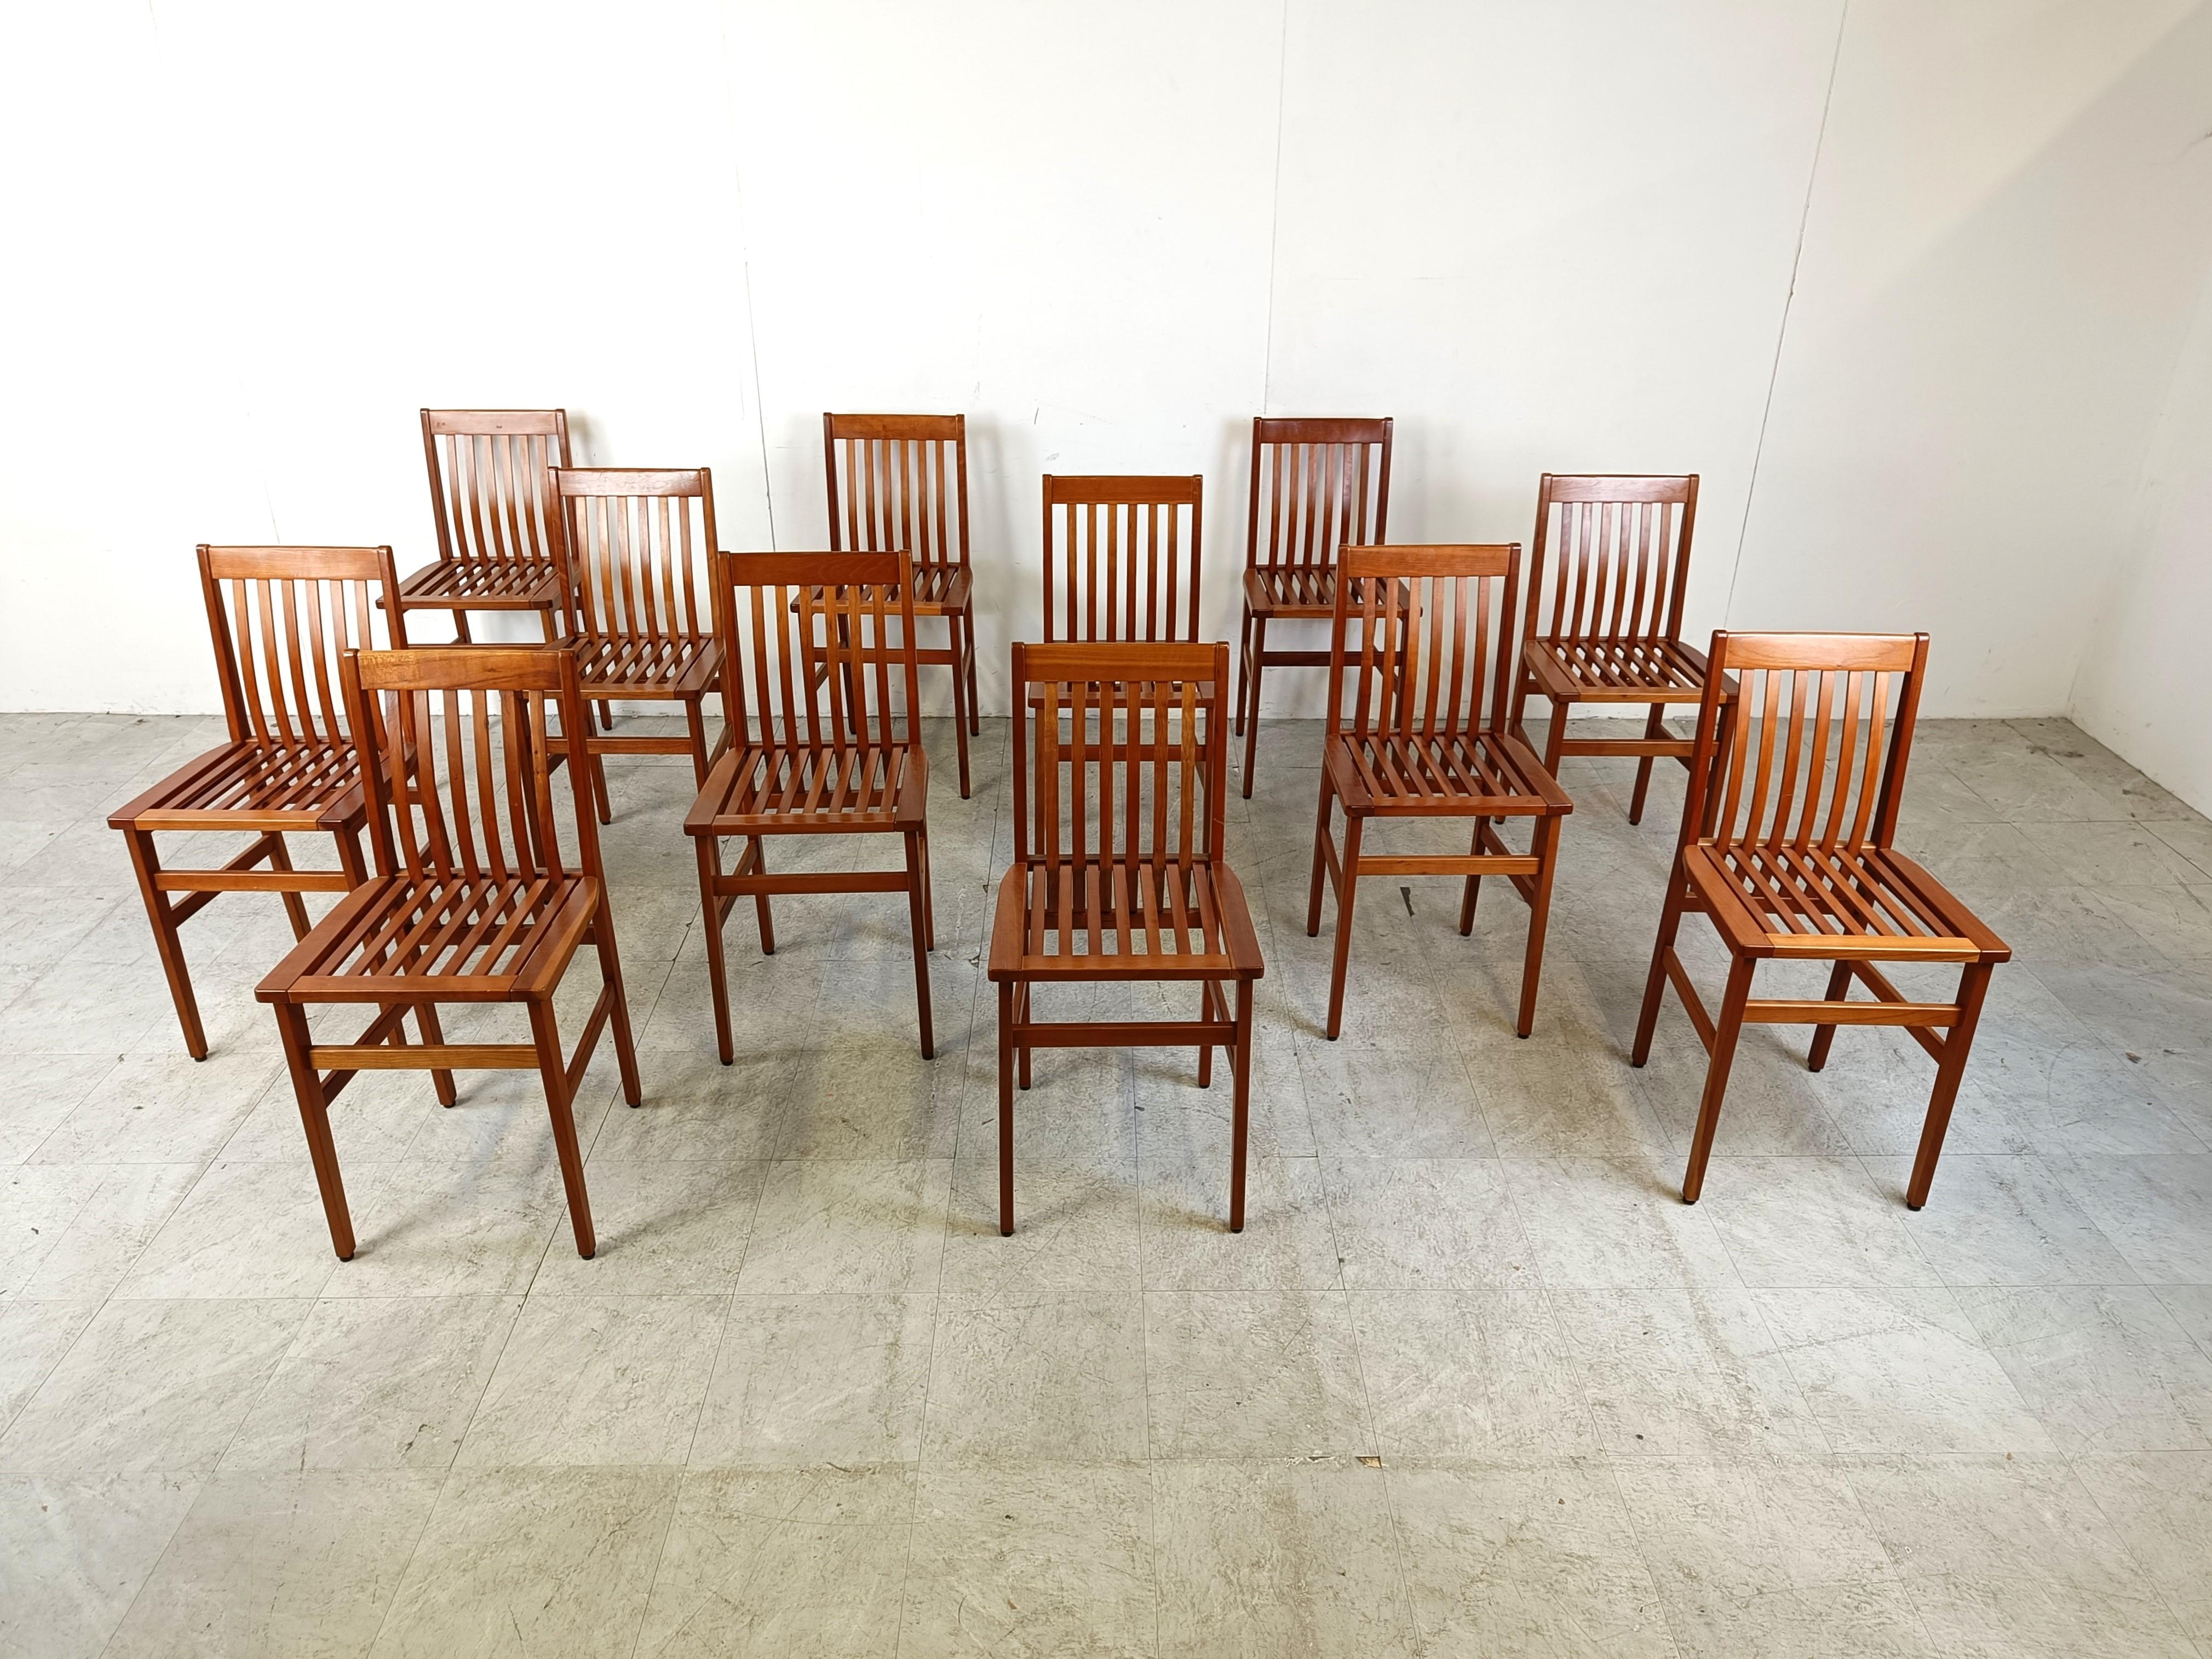 Set of 12 Milano dining chairs designed in 1987 by Aldo Rossi for Molteni.

Exhibited in the permanent collection of the Molteni museum, it is currently a fairly rare chair to find as it is out of production.

Being able to offer a large set is very